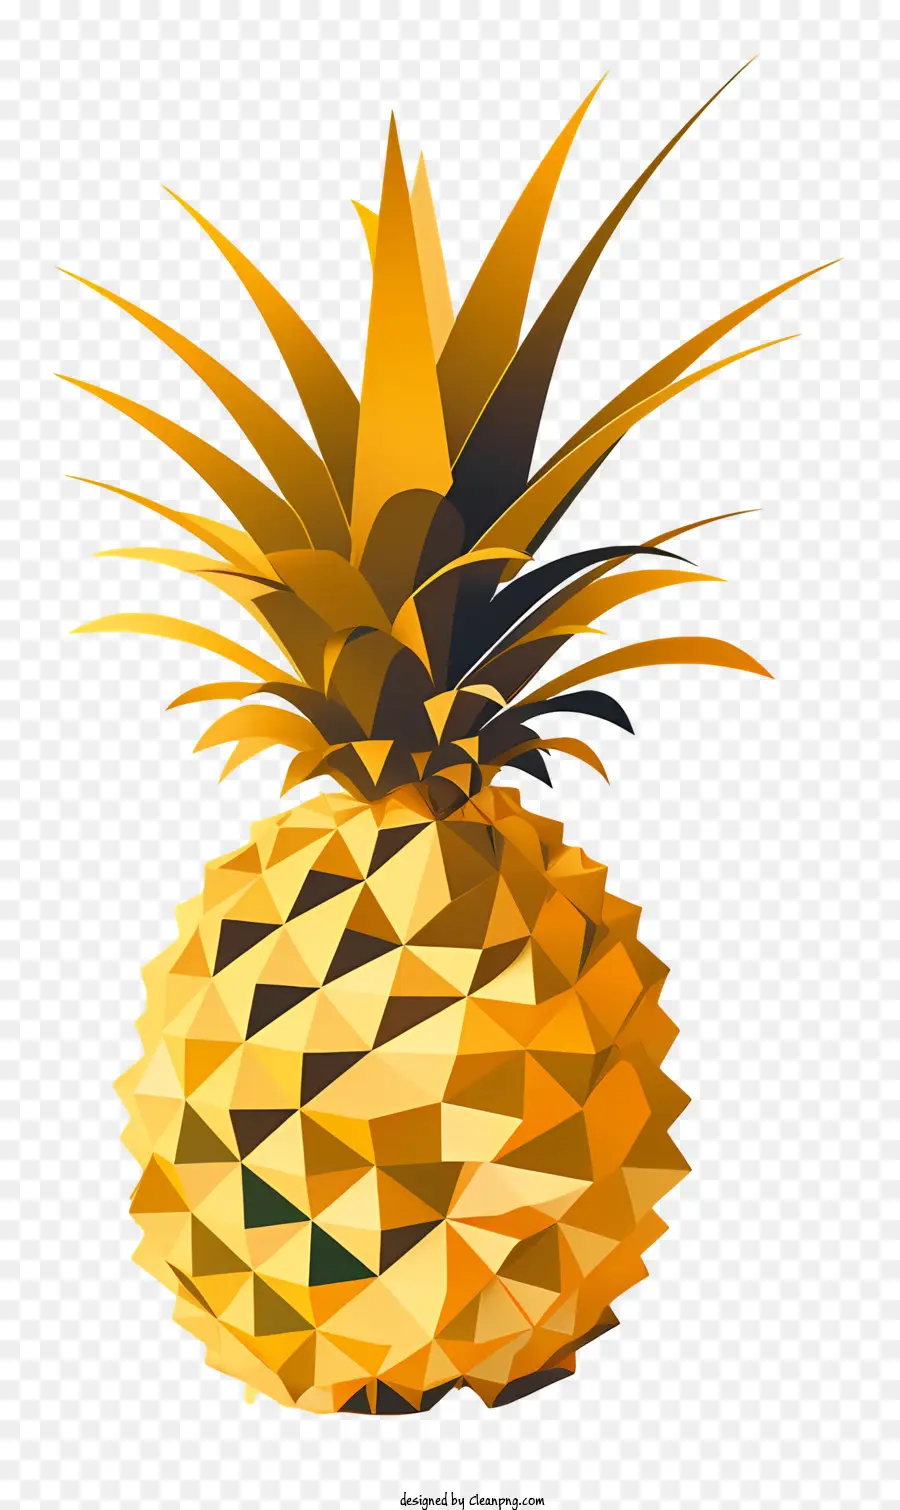 L'ananas，Or L'ananas PNG